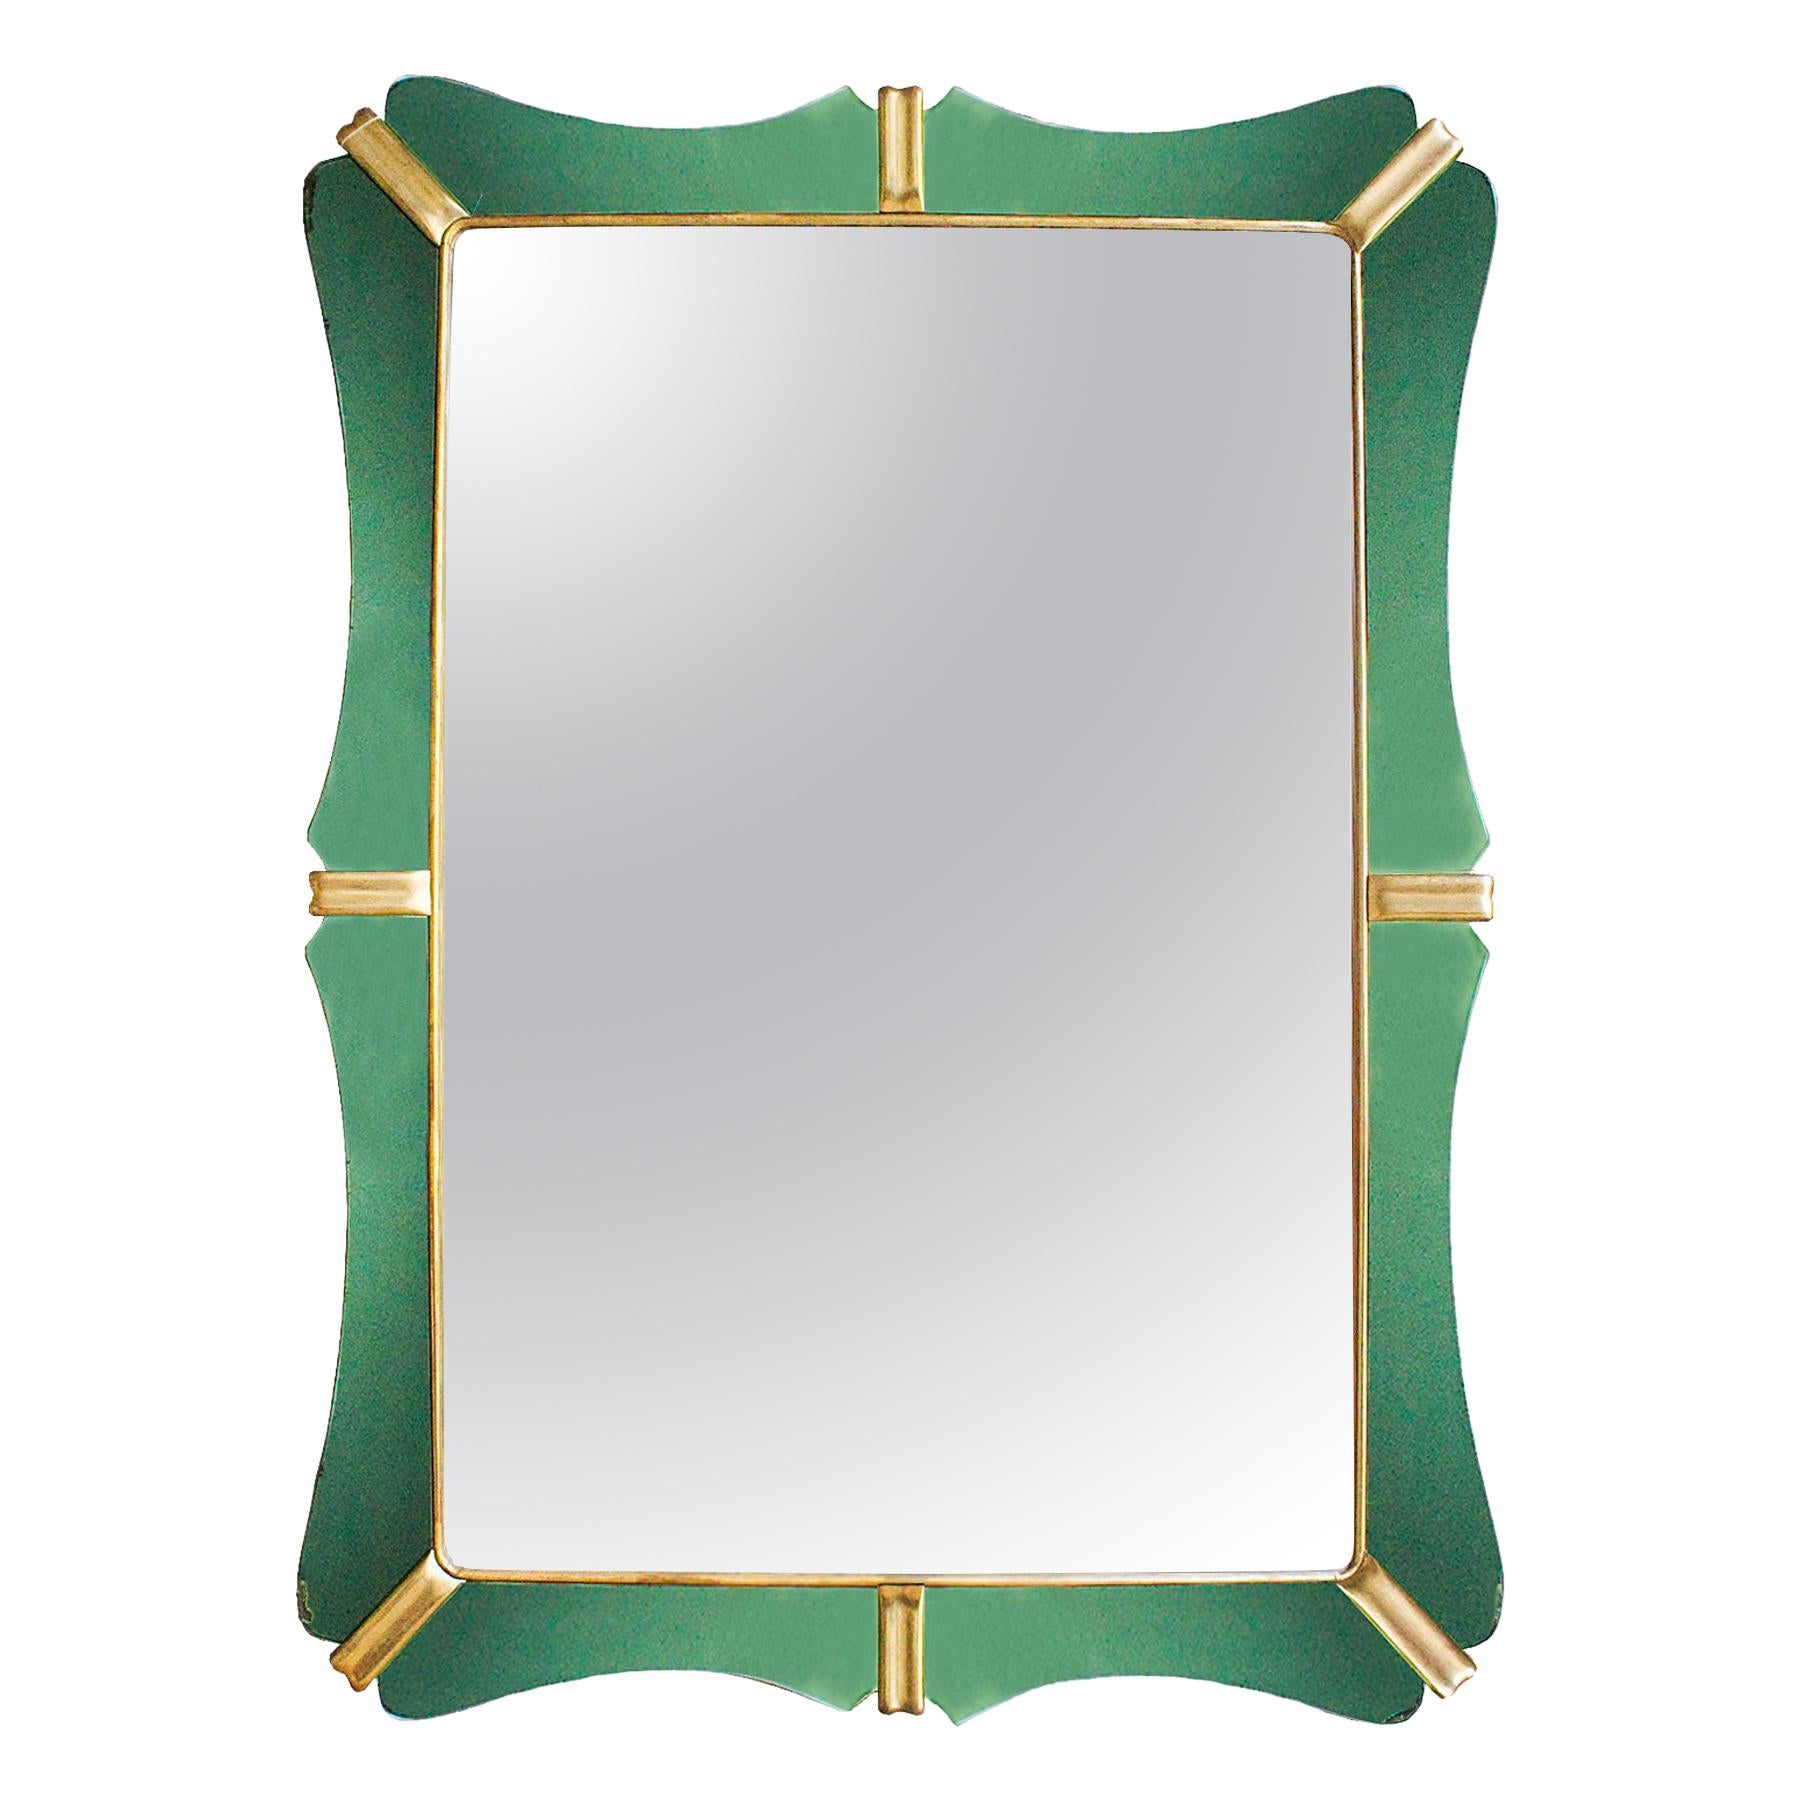 1950s Large Mirror, Green Mirrors Frame and Golden Leaf Wood, Italy